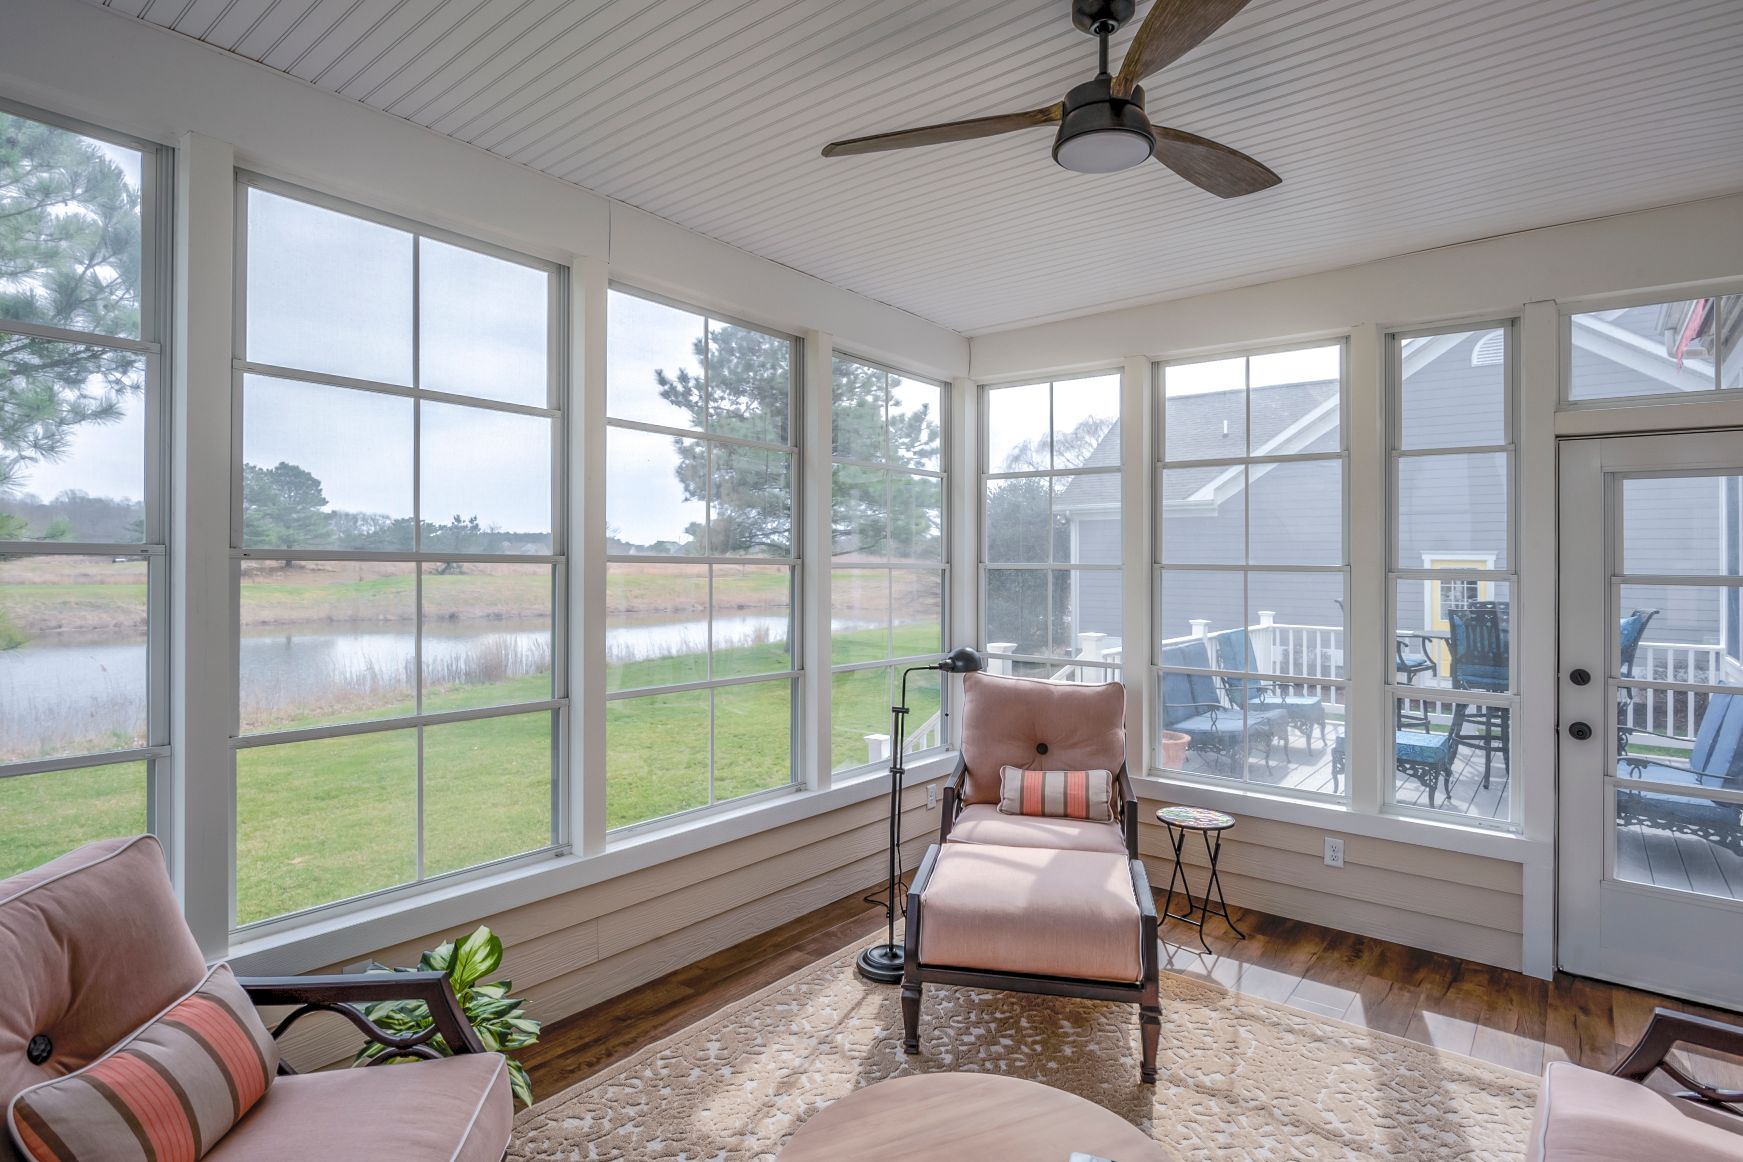 October Glory Exterior in Ocean View DE - Sunroom with View of Landscape and Lower Deck